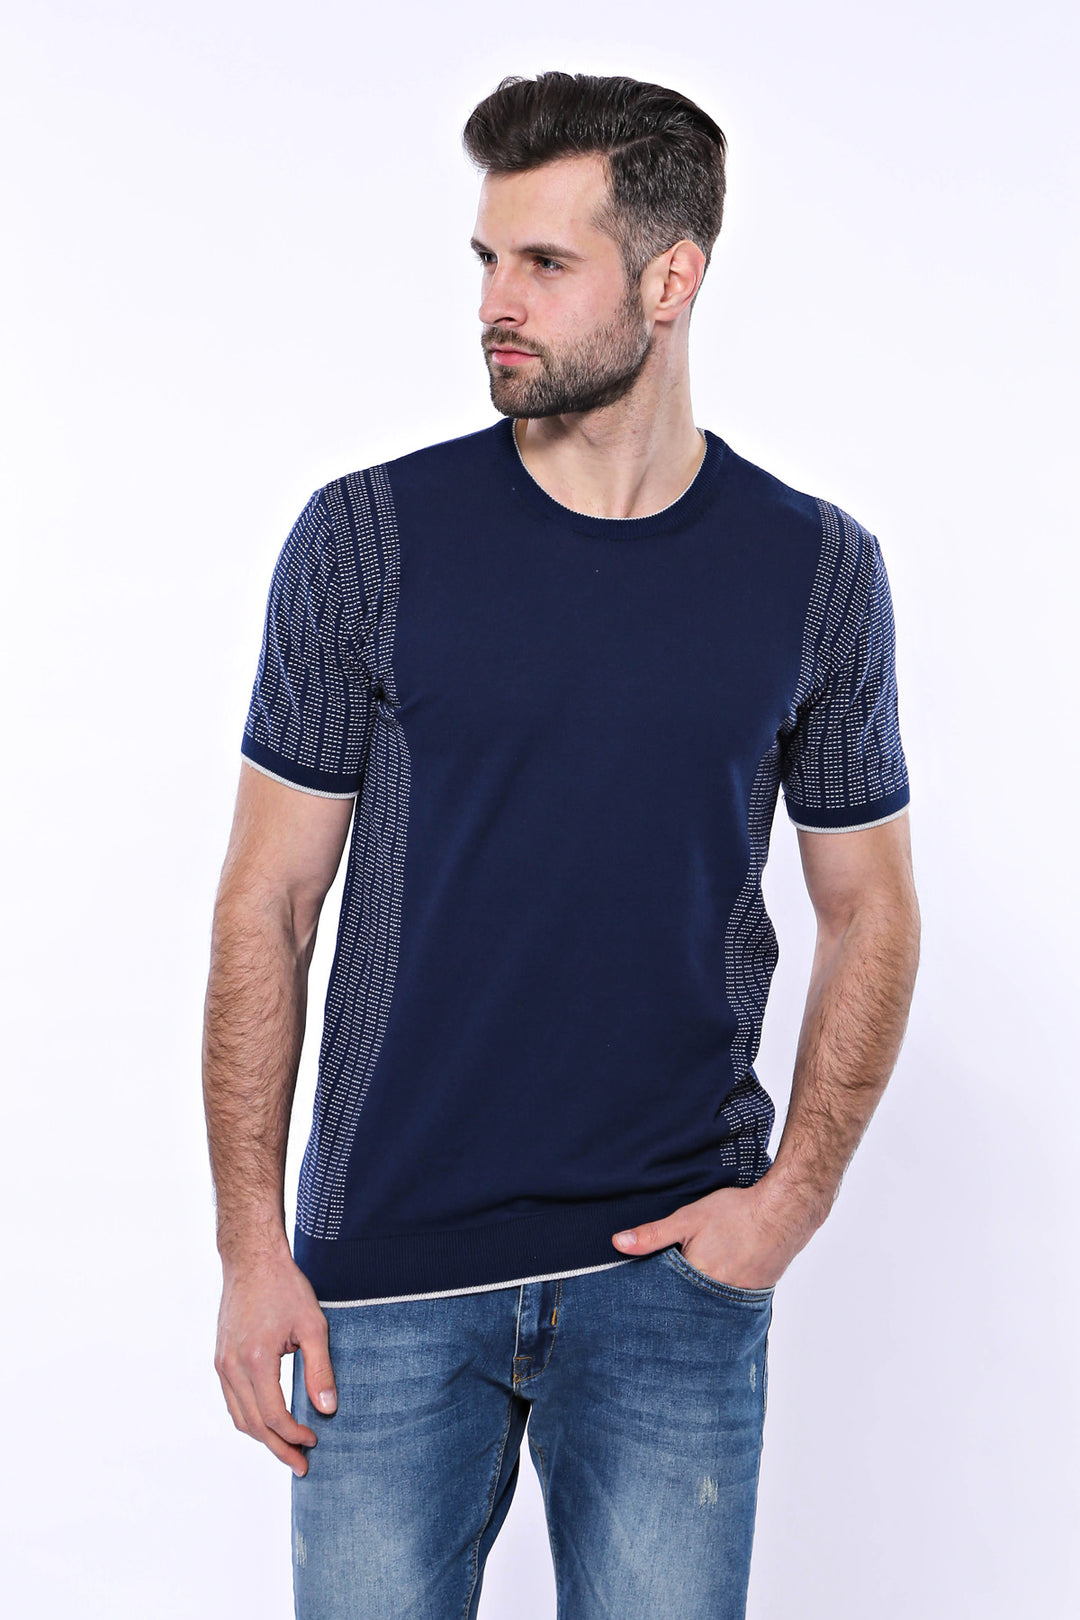 Circle Neck Patterned Navy Knitted T-Shirt - Wessi